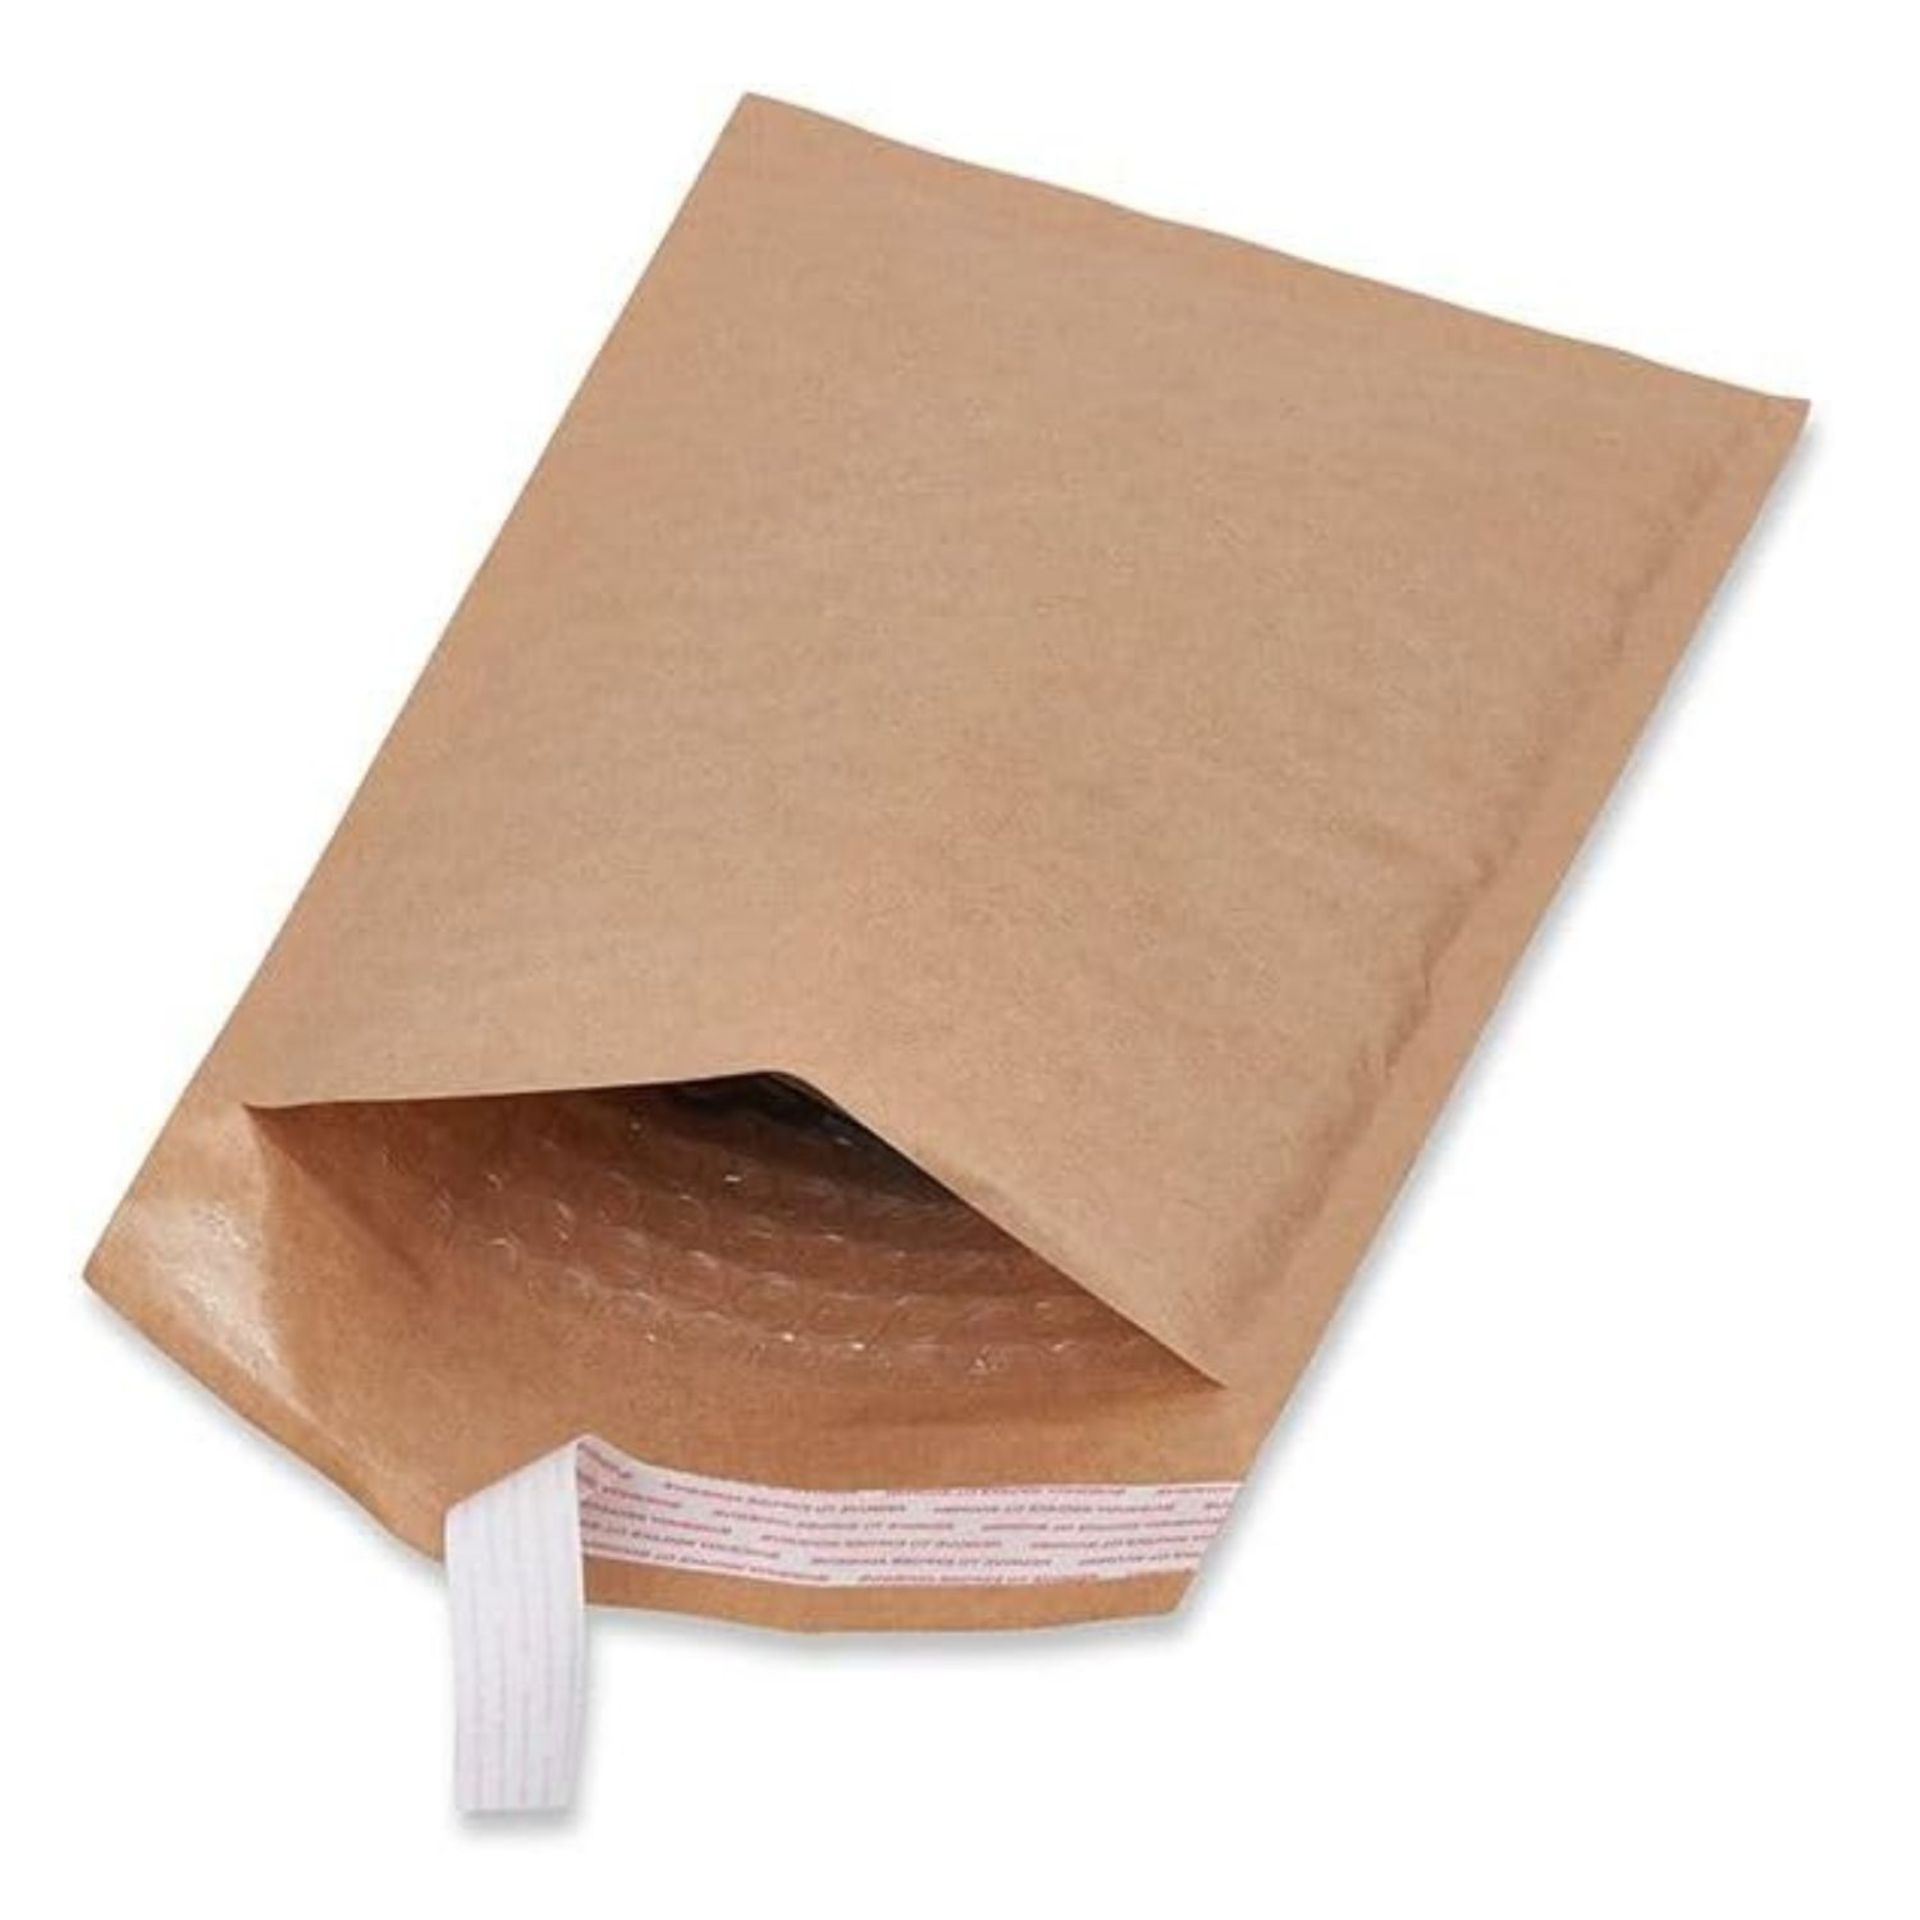 10 BOXES OF PAPER BAG ENVELOPES BUBBLE BAGS 100 PACK PEEL AND SEAL TOUGH LIGHT PADDED (170 X 210MM) - Image 2 of 4